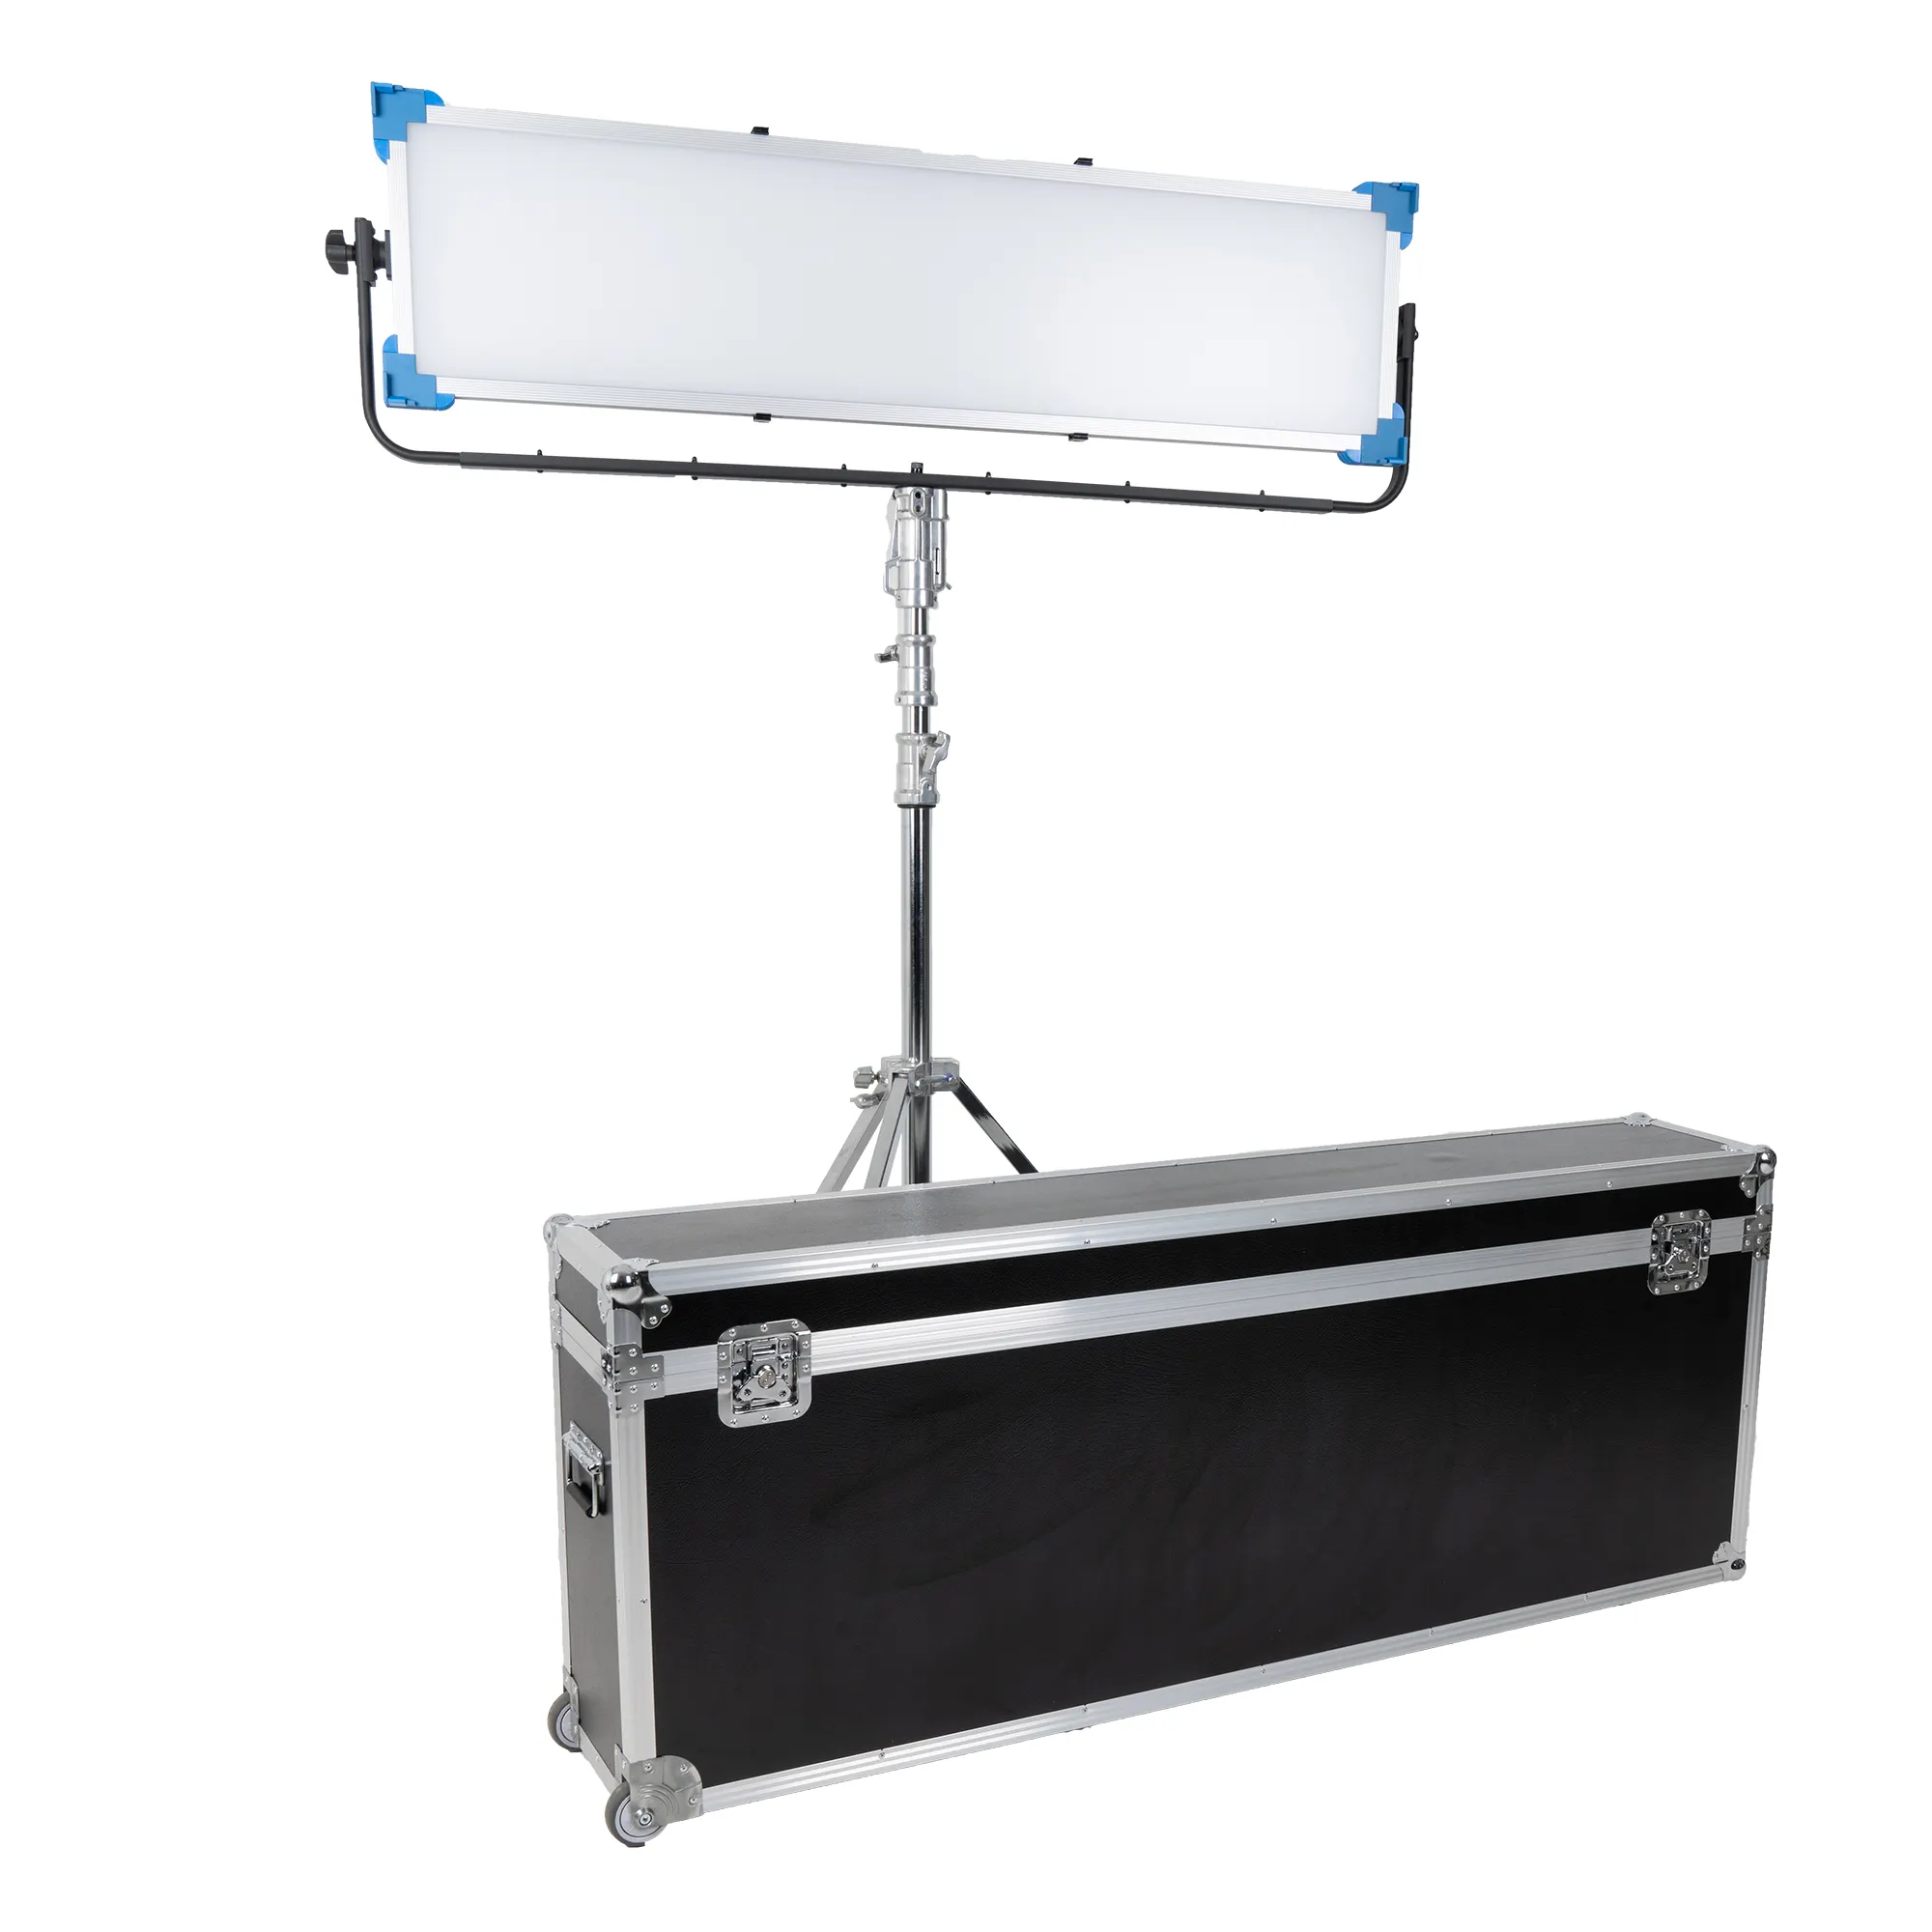 Hot sale High Power studio light 600w led rgb long panel for video photography and film